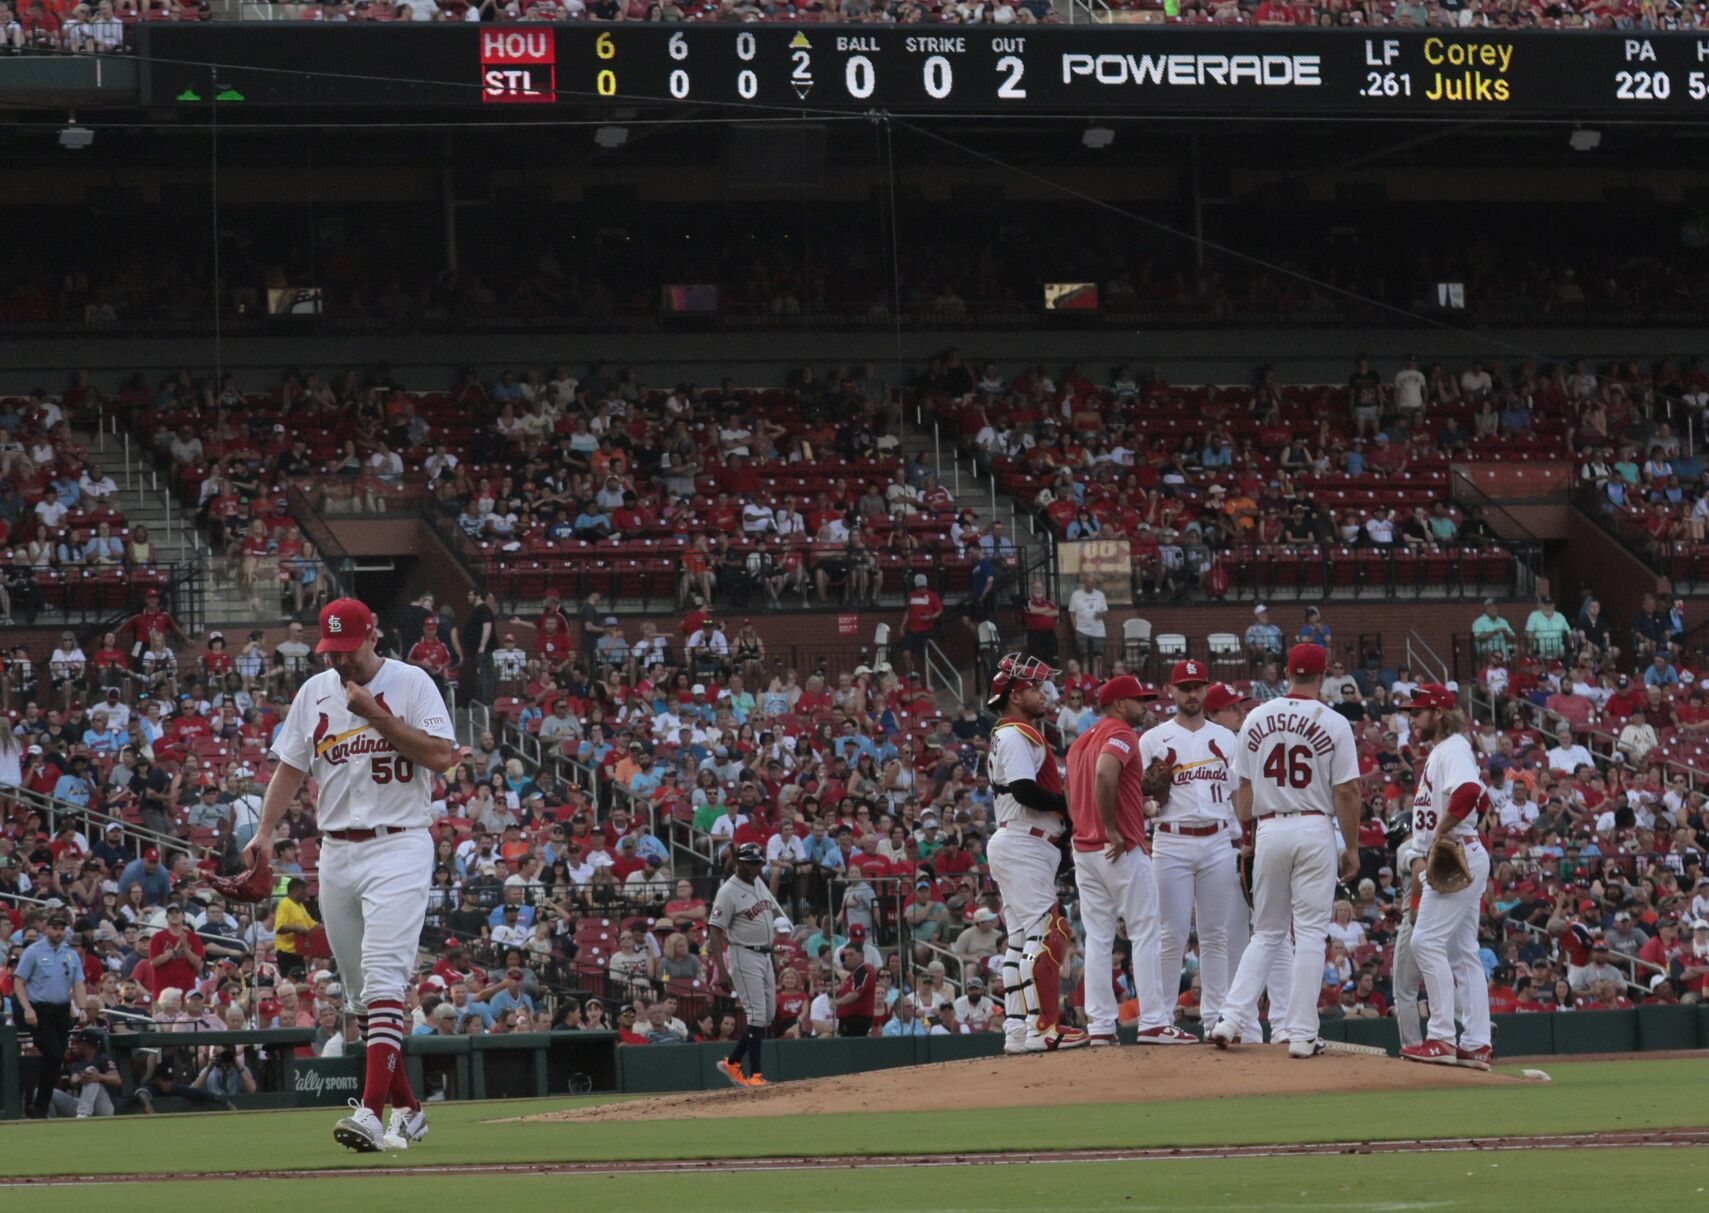 Cardinals trounced 14-0 by Astros in series finale as Adam Wainwright gives up six runs